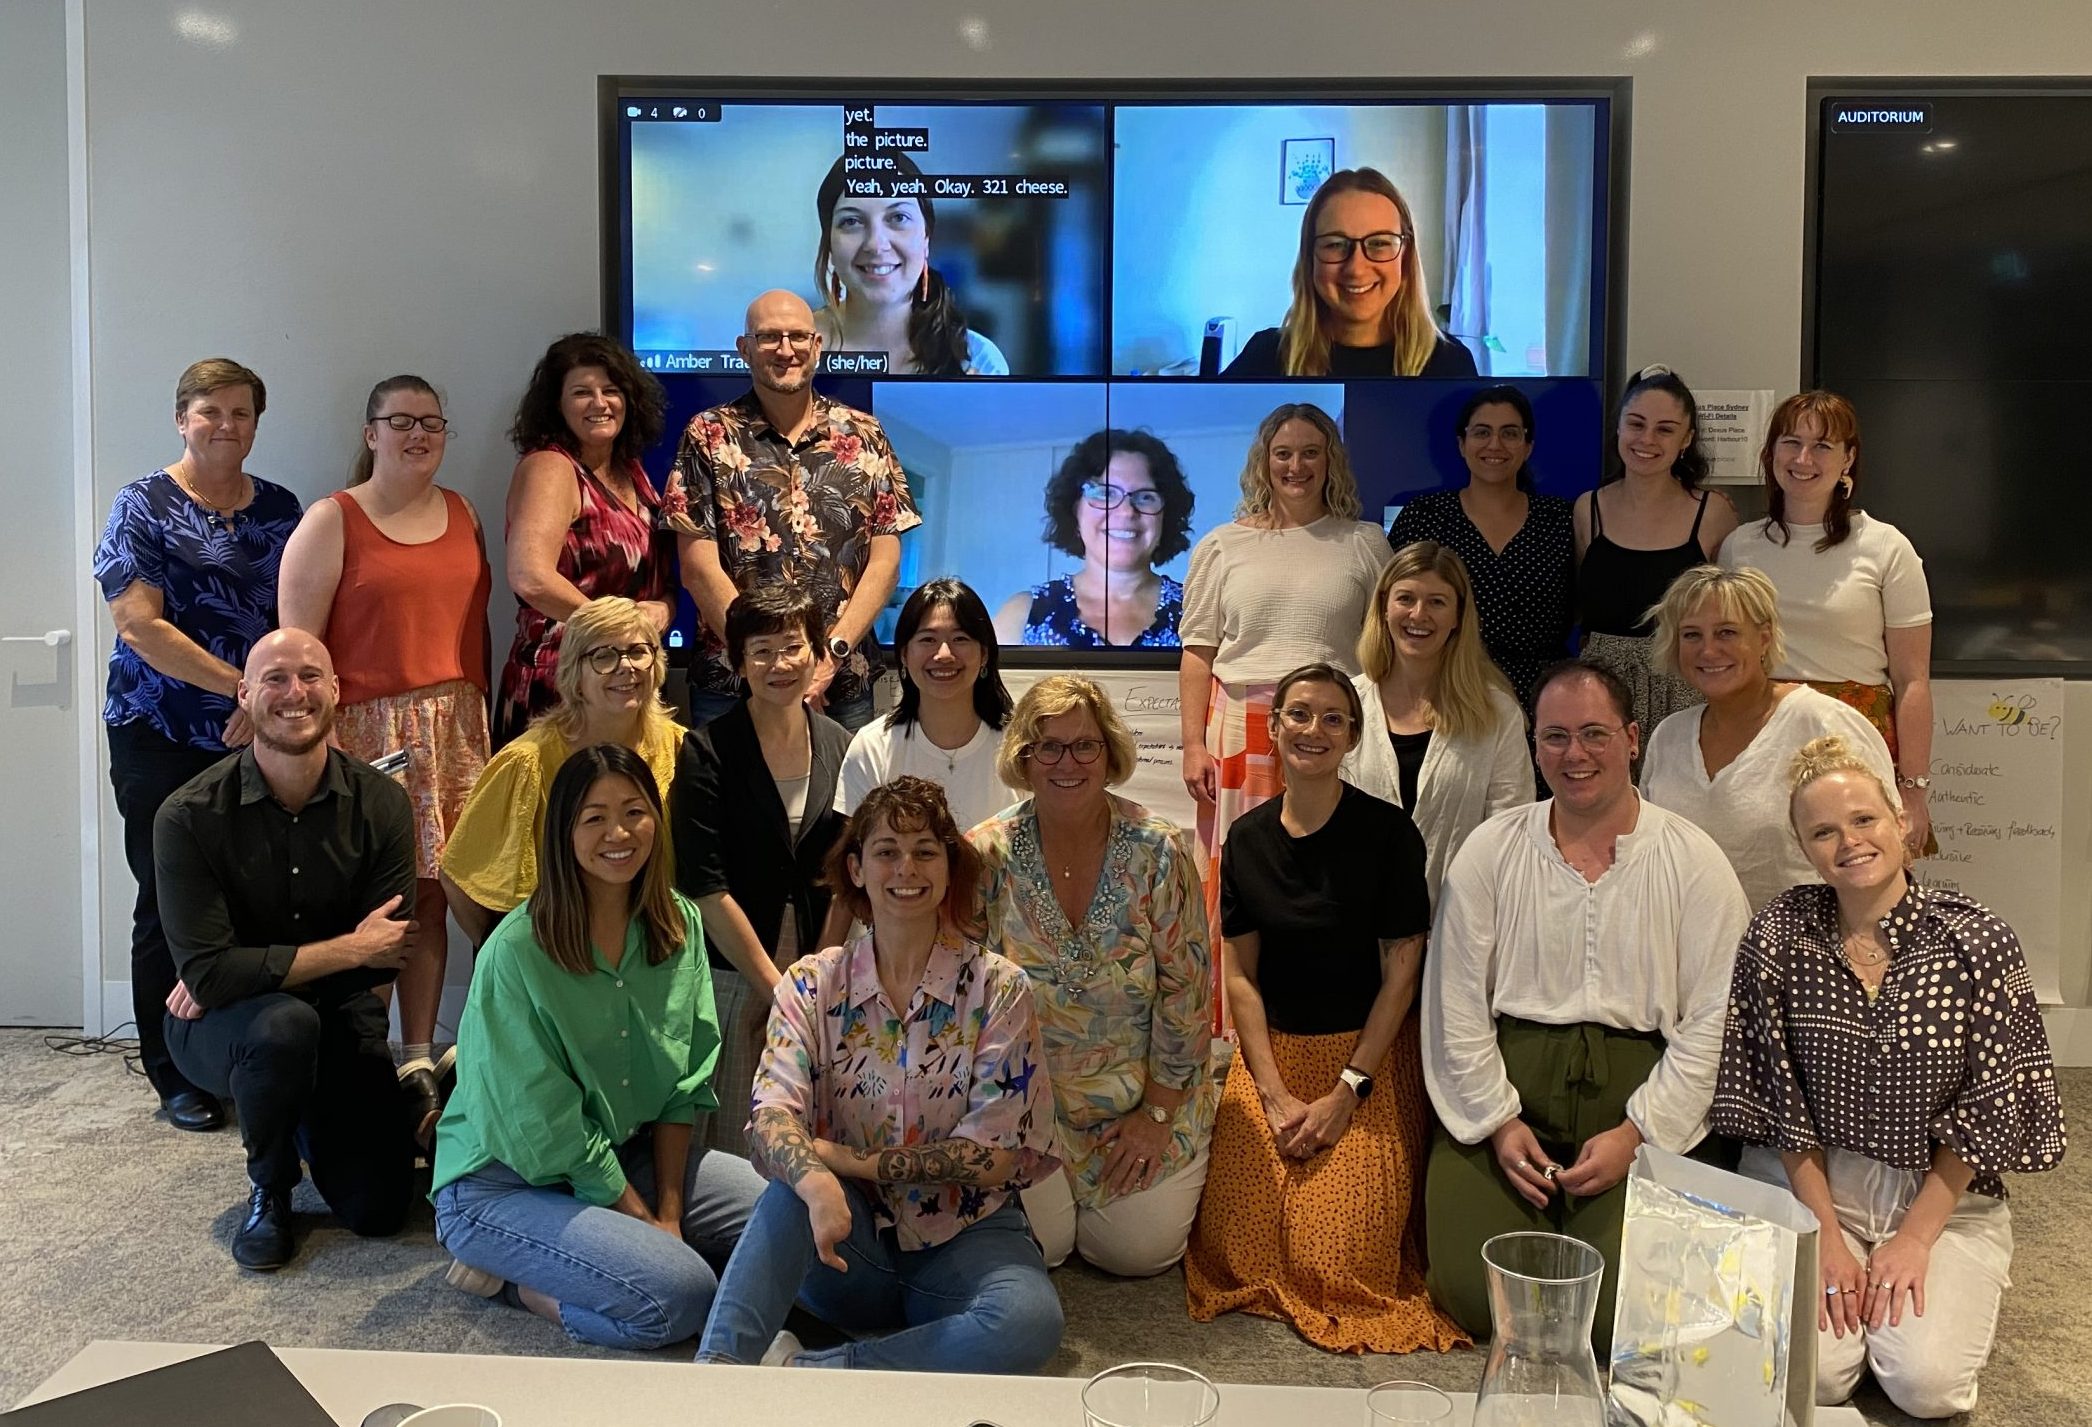 Australian Network on Disability team huddled together smiling. Three members of the team have joined virtually and are projected onto a screen behind the team.